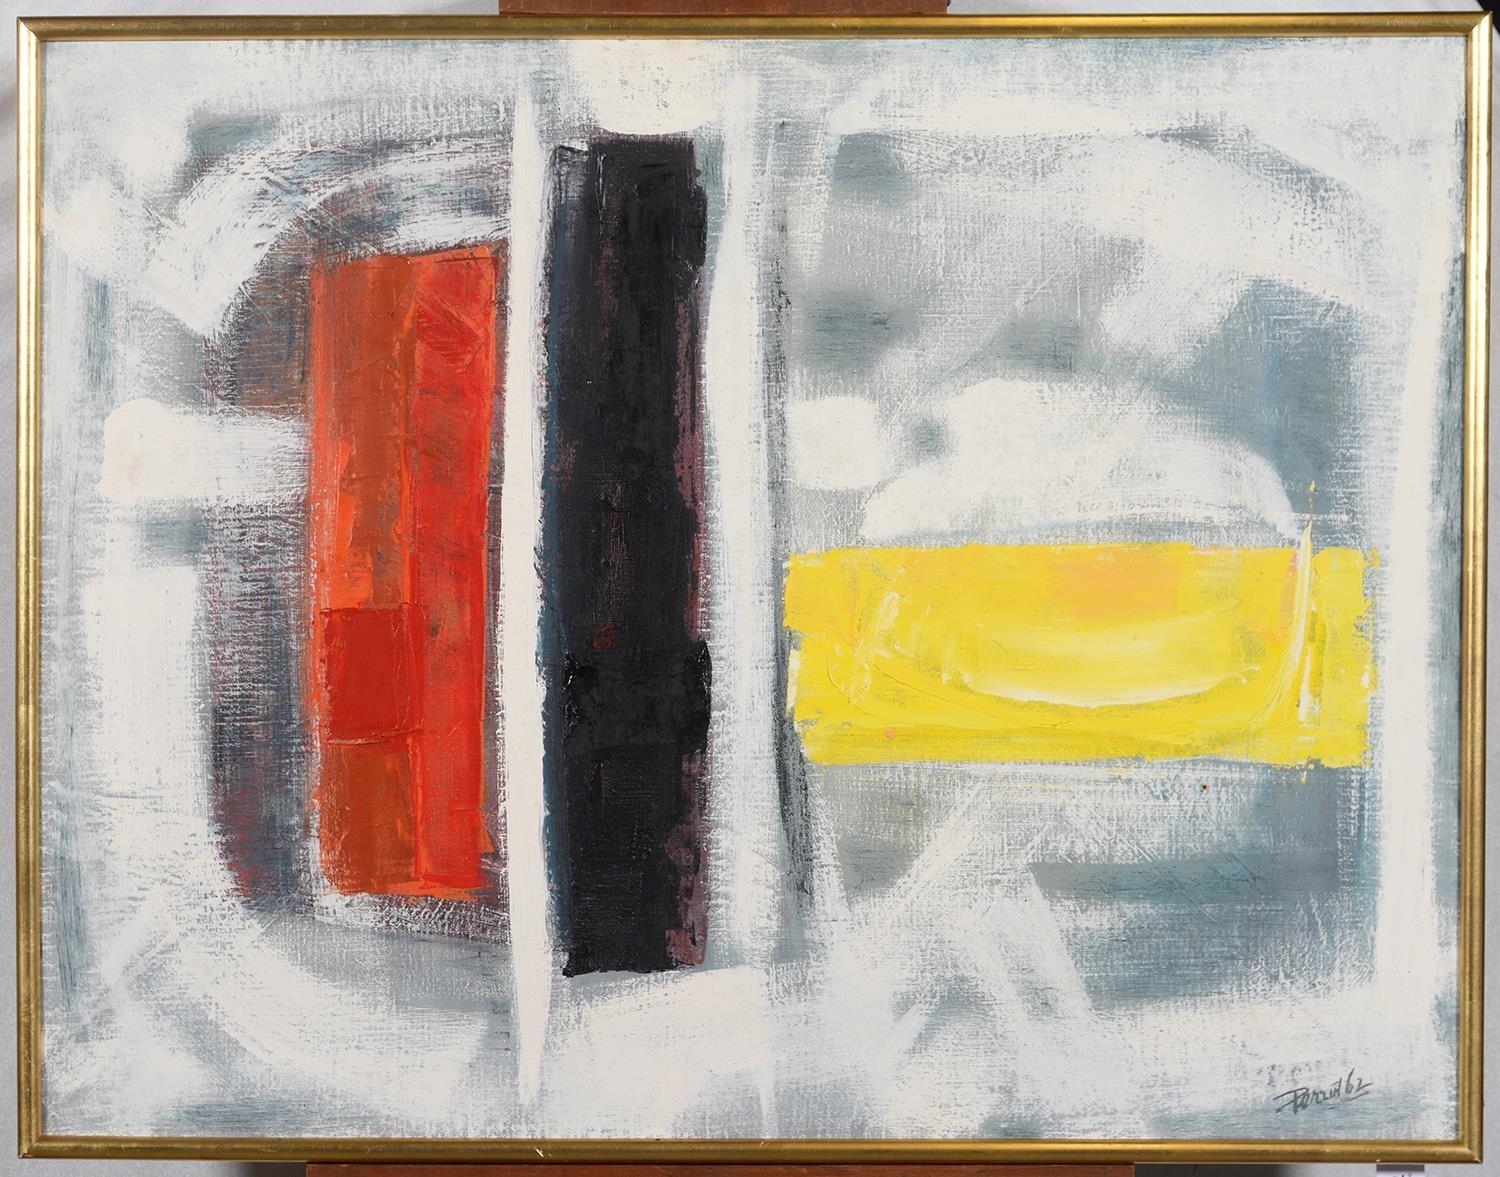 MODERN BRITISH SCHOOL, 1962 - UNTITLED (ABSTRACT), TWO, BOTH SIGNED (PERRIN) AND DATED '62, OIL ON - Image 2 of 6